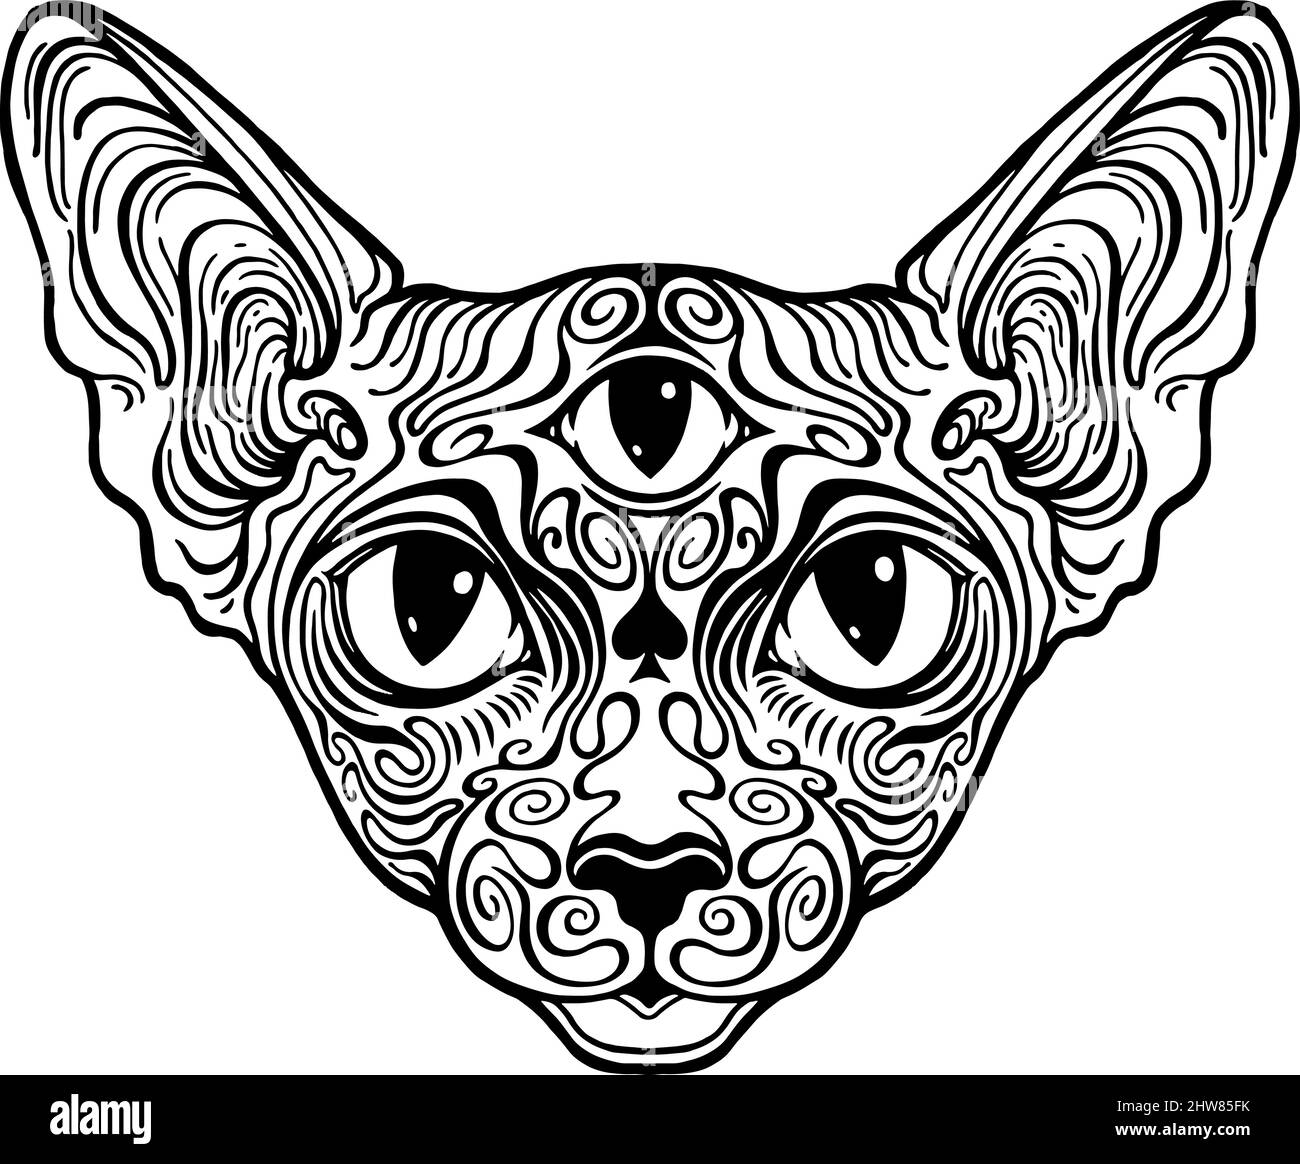 Cat Sphinx patterned. third eye graphic illustration Stock Vector